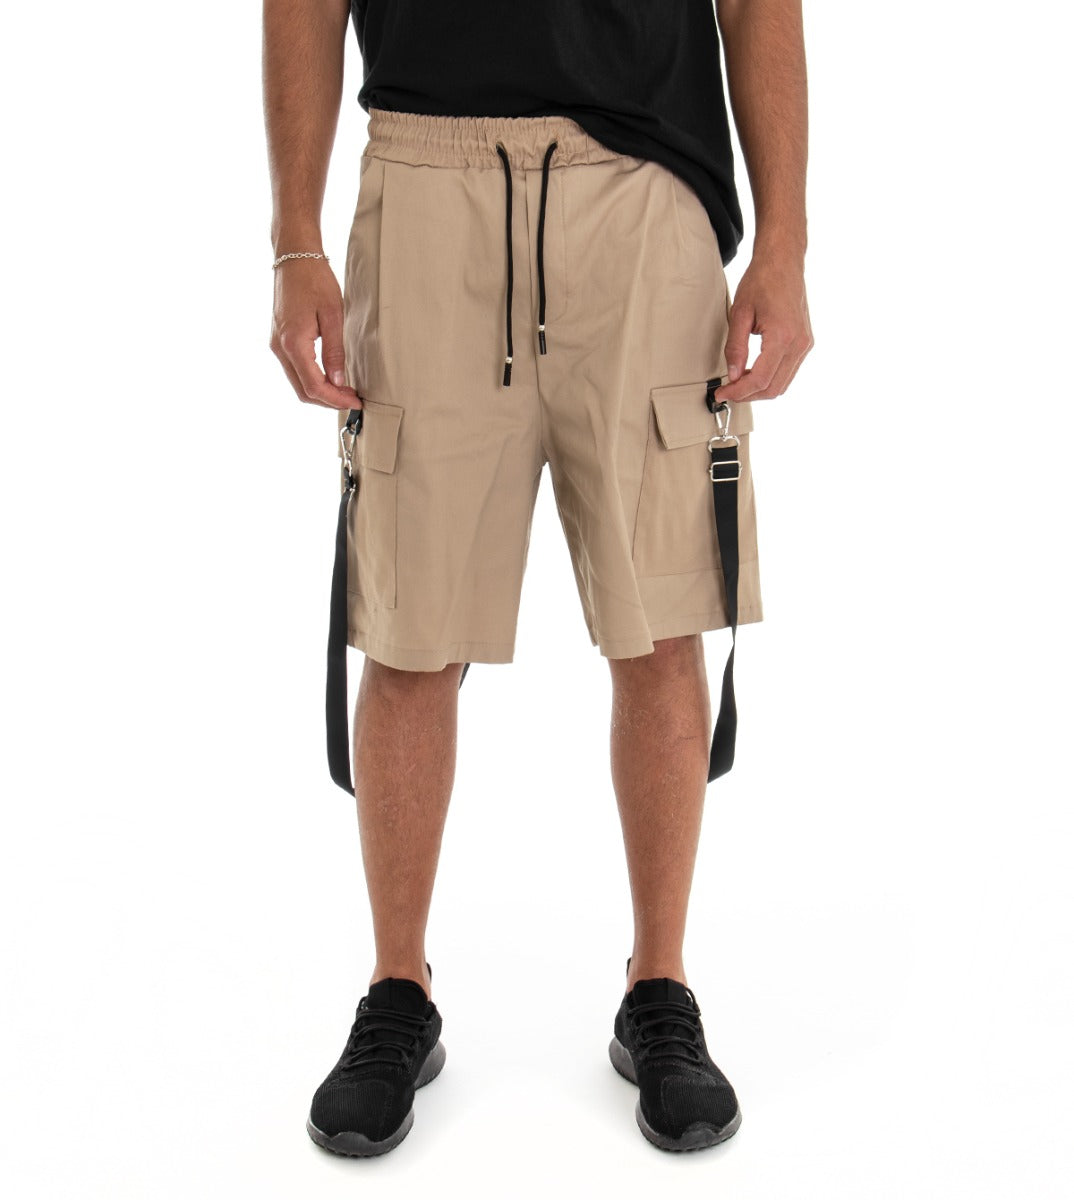 Bermuda Shorts Men's Shorts Solid Color Beige Cargo GIOSAL-PC1555A